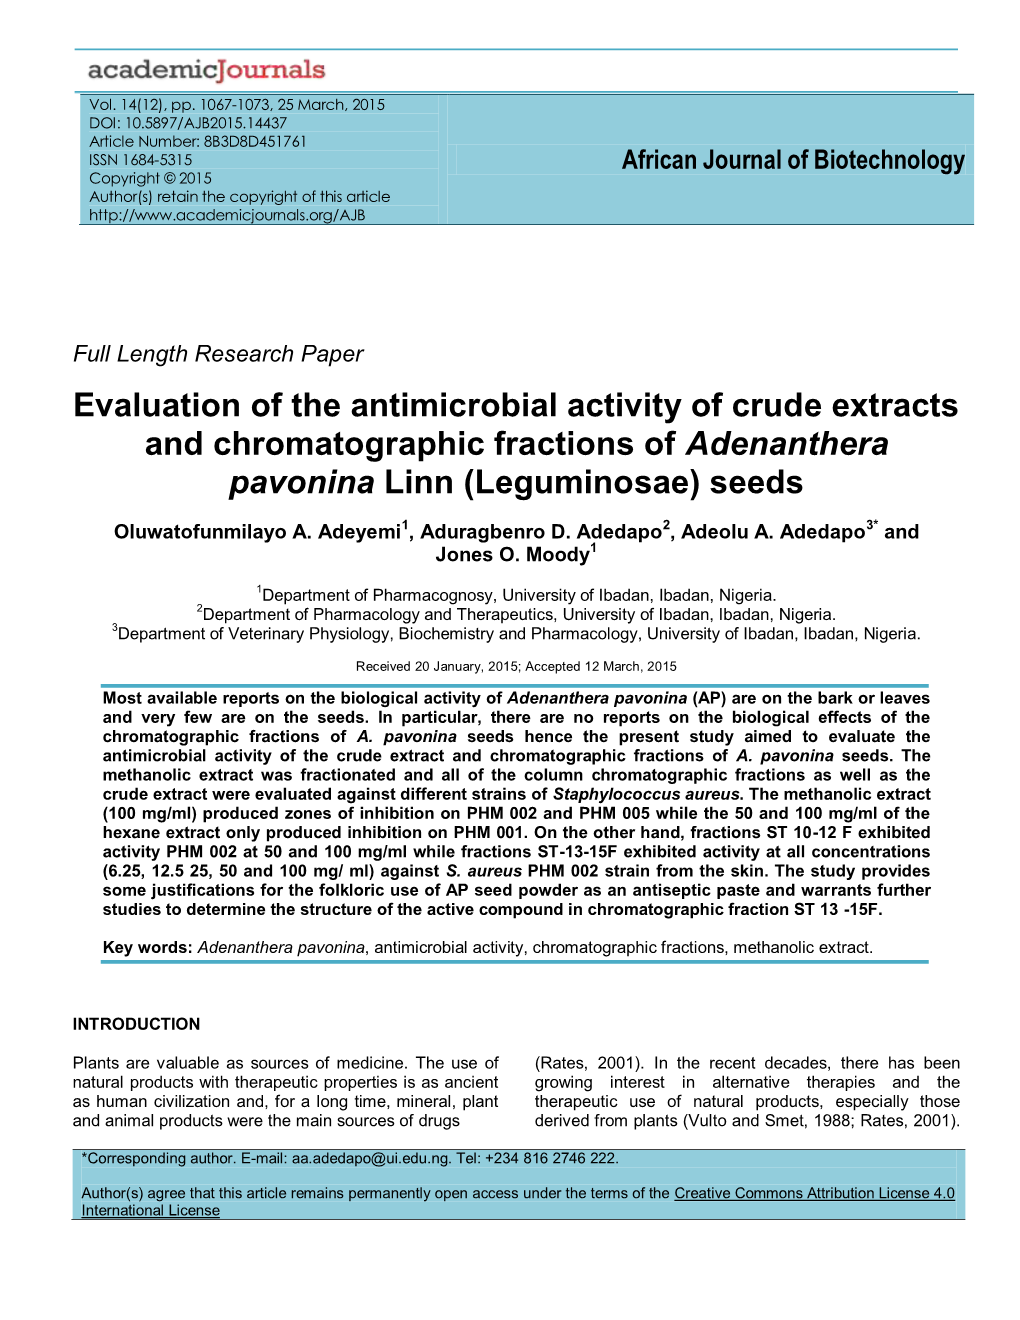 Evaluation of the Antimicrobial Activity of Crude Extracts and Chromatographic Fractions of Adenanthera Pavonina Linn (Leguminosae) Seeds